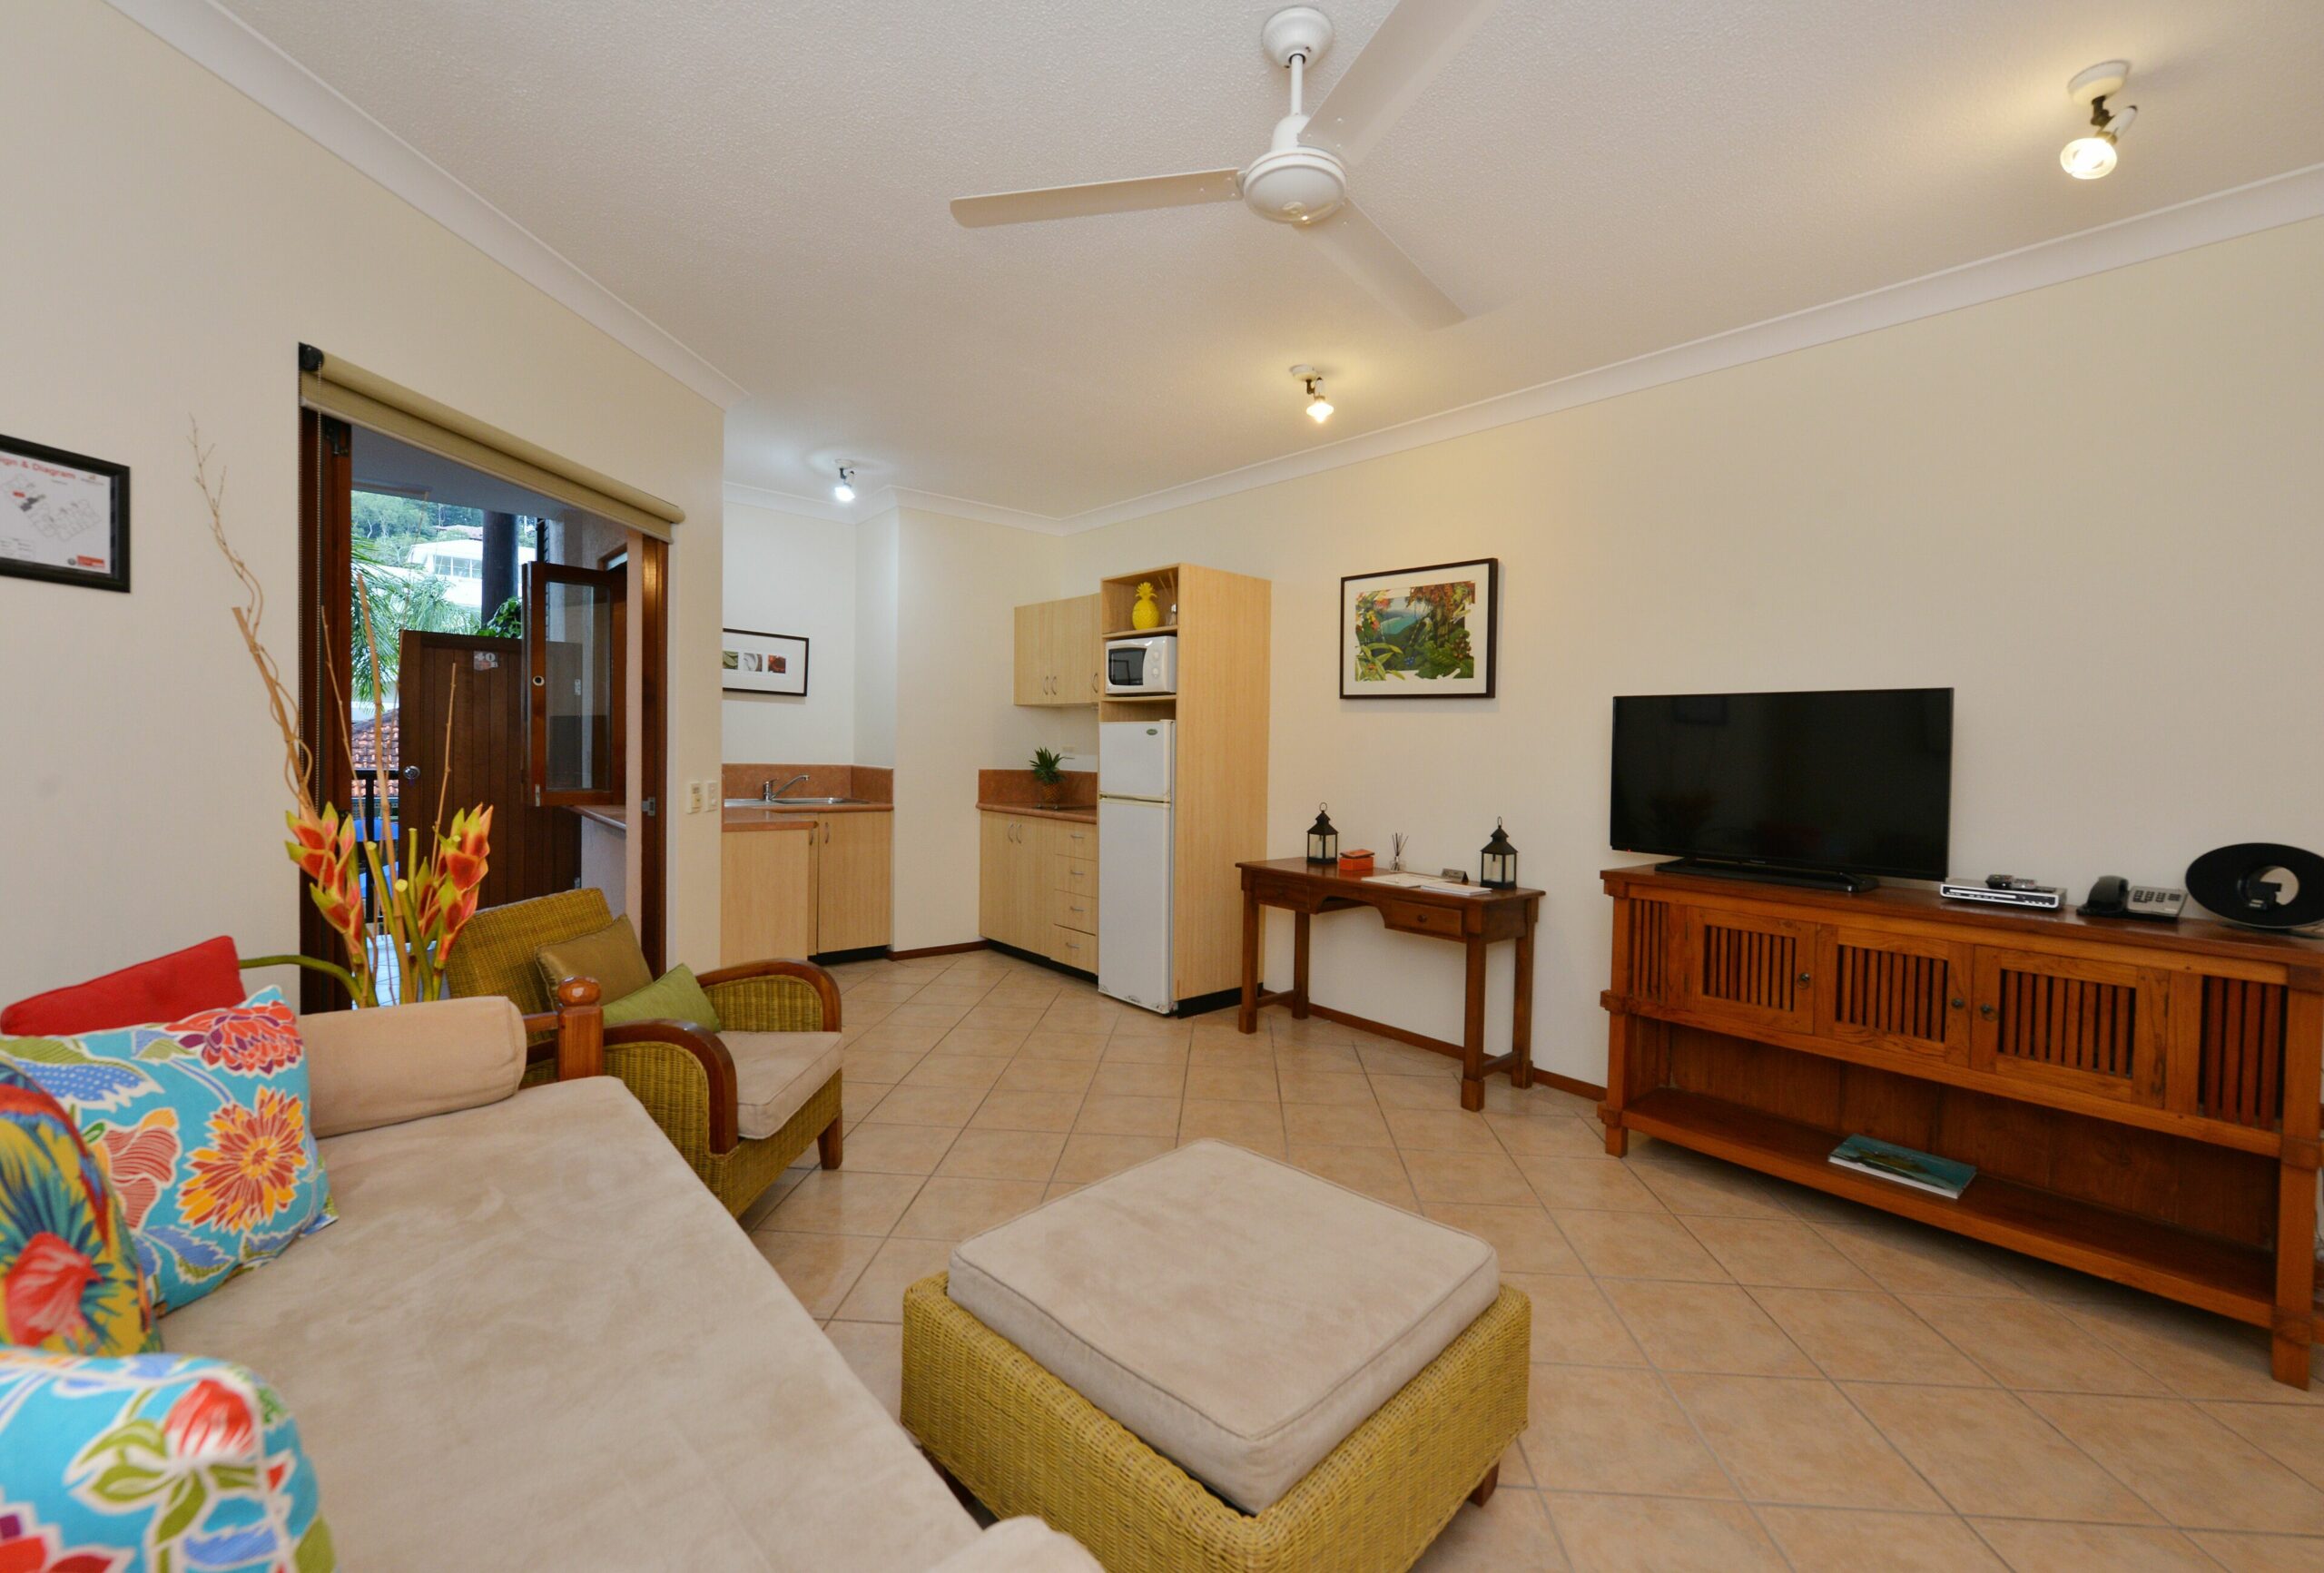 Poolside @ Hibiscus - Spacious 1 Bedroom Apartment, two Minutes Walk Into Town